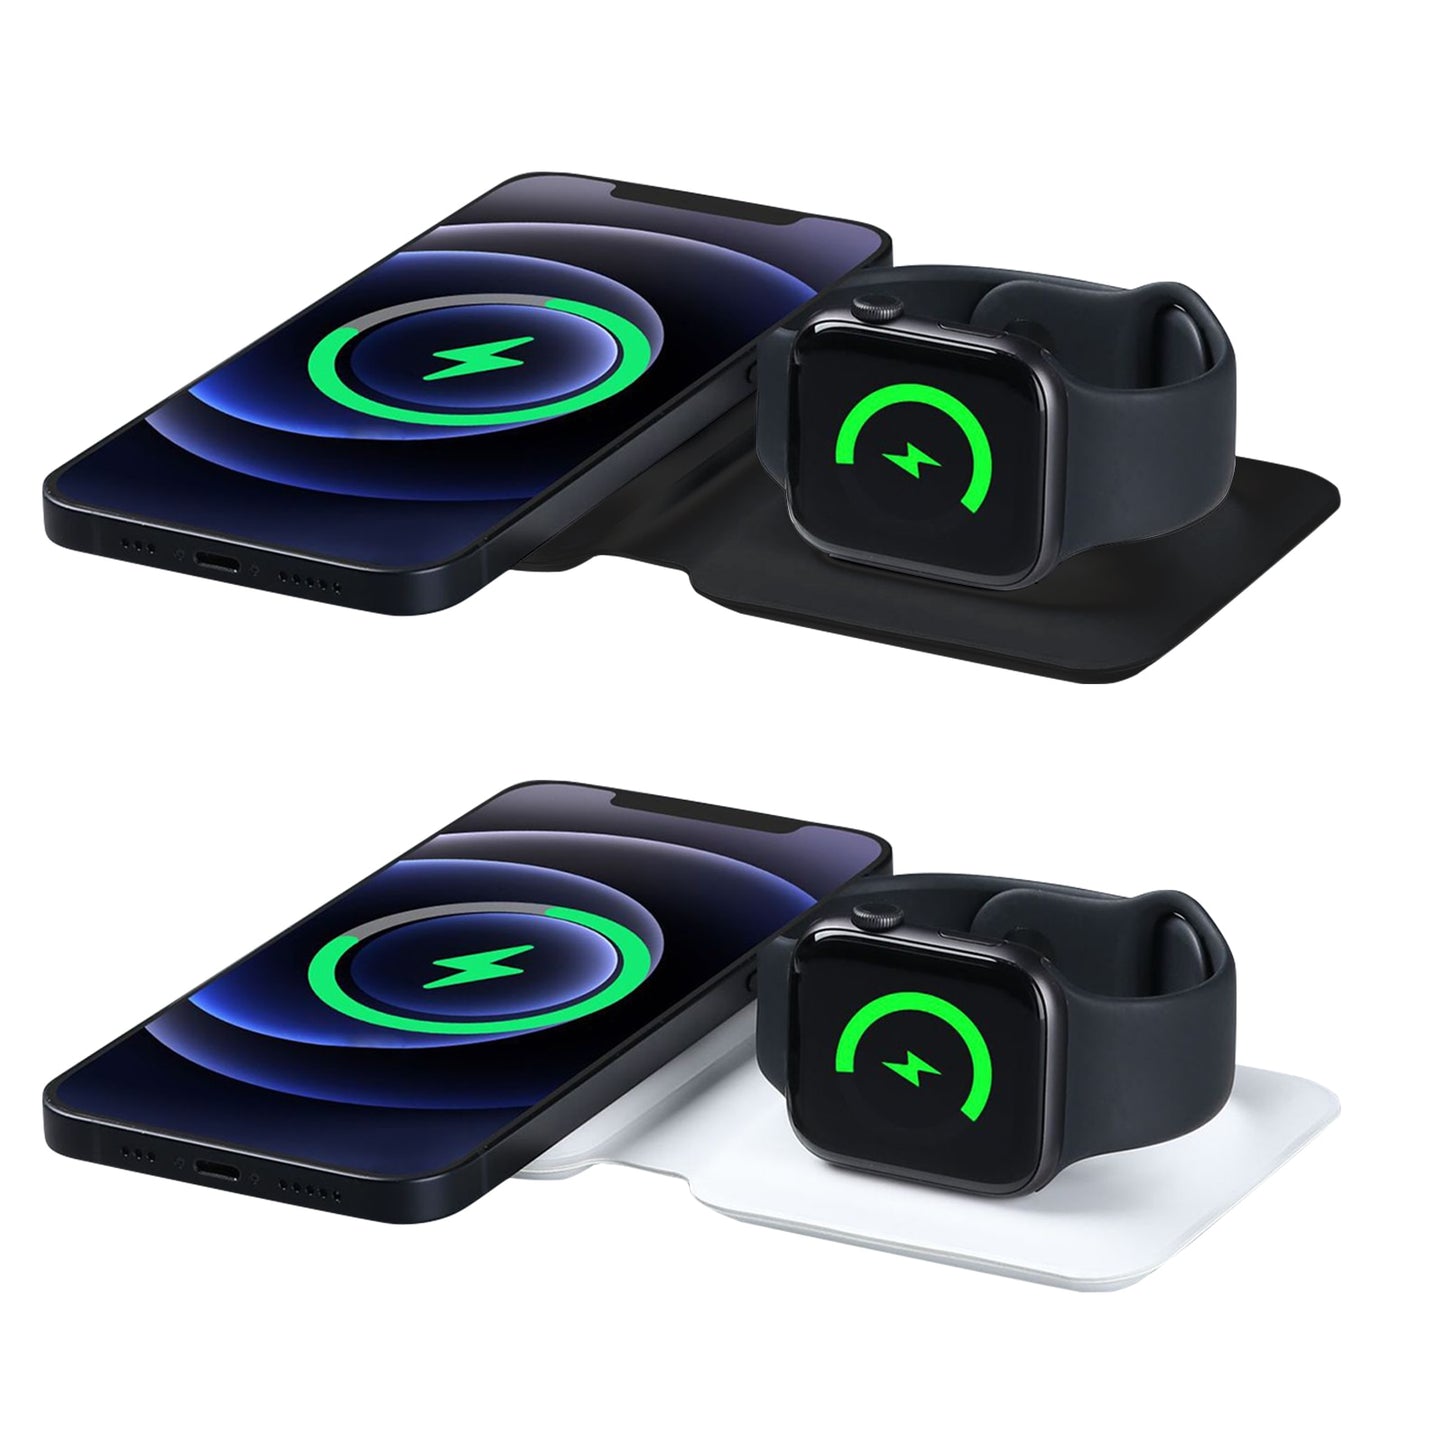 2 in 1 Magnetic Wireless Charging Doc For iPhone, AirPods, Apple Watch